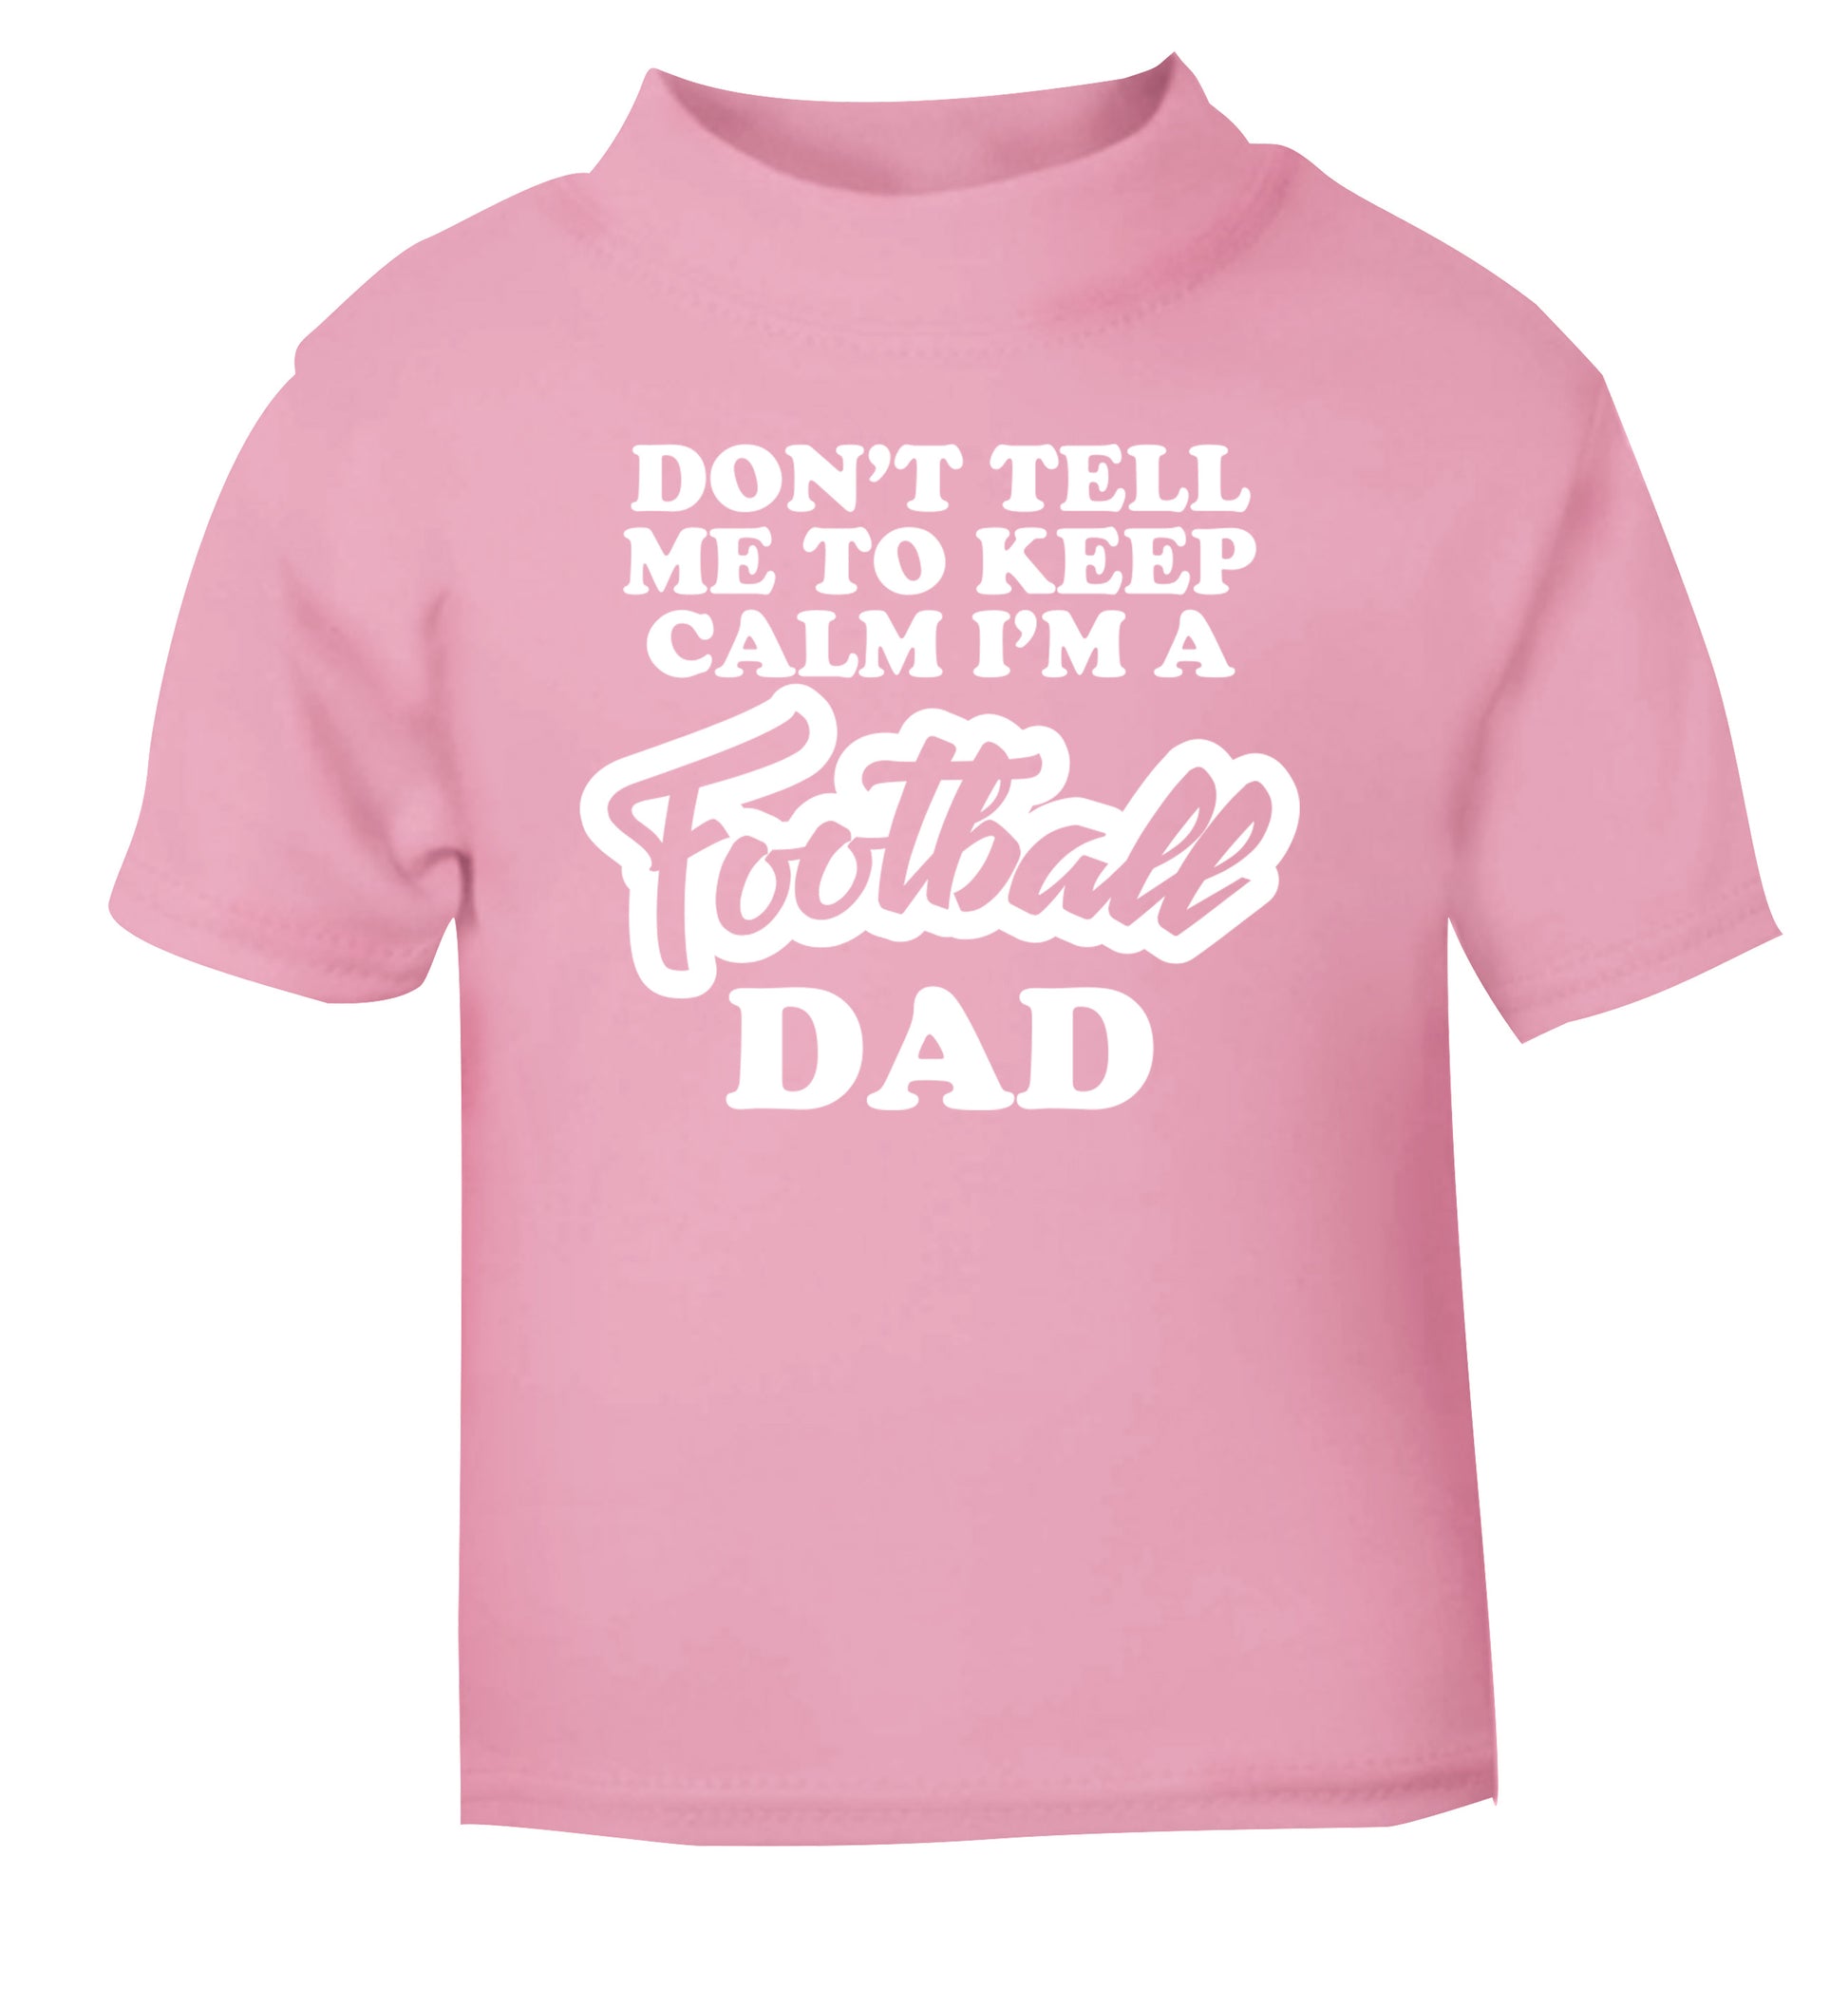 Don't tell me to keep calm I'm a football dad light pink Baby Toddler Tshirt 2 Years